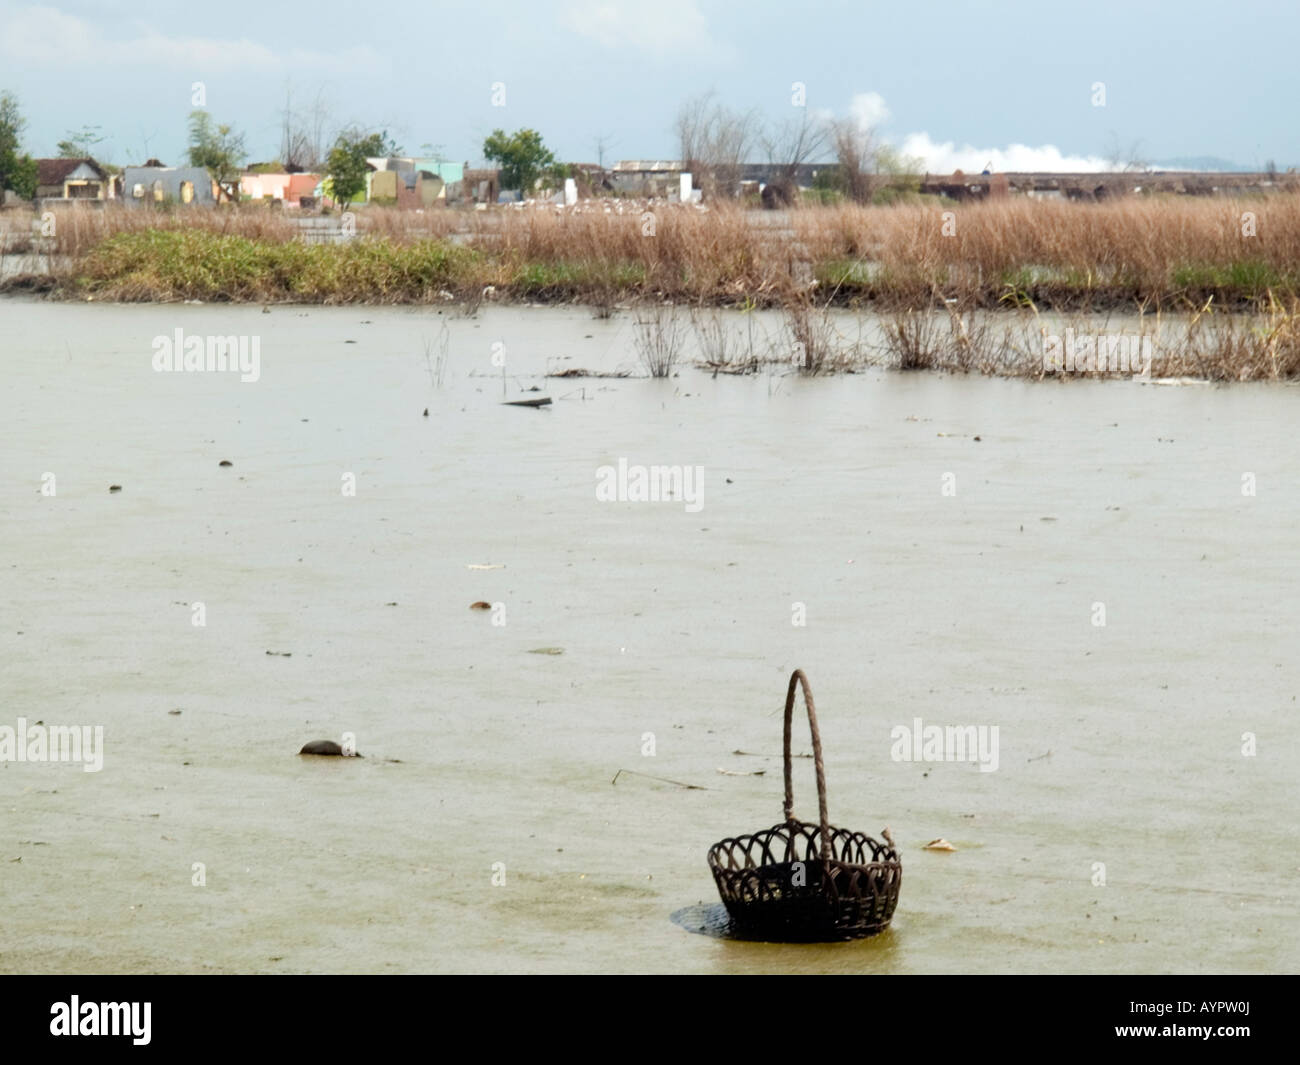 Lake of hot mud and water which is engulfing this small village at Sidoarjo,East Java,Indonesia. Stock Photo